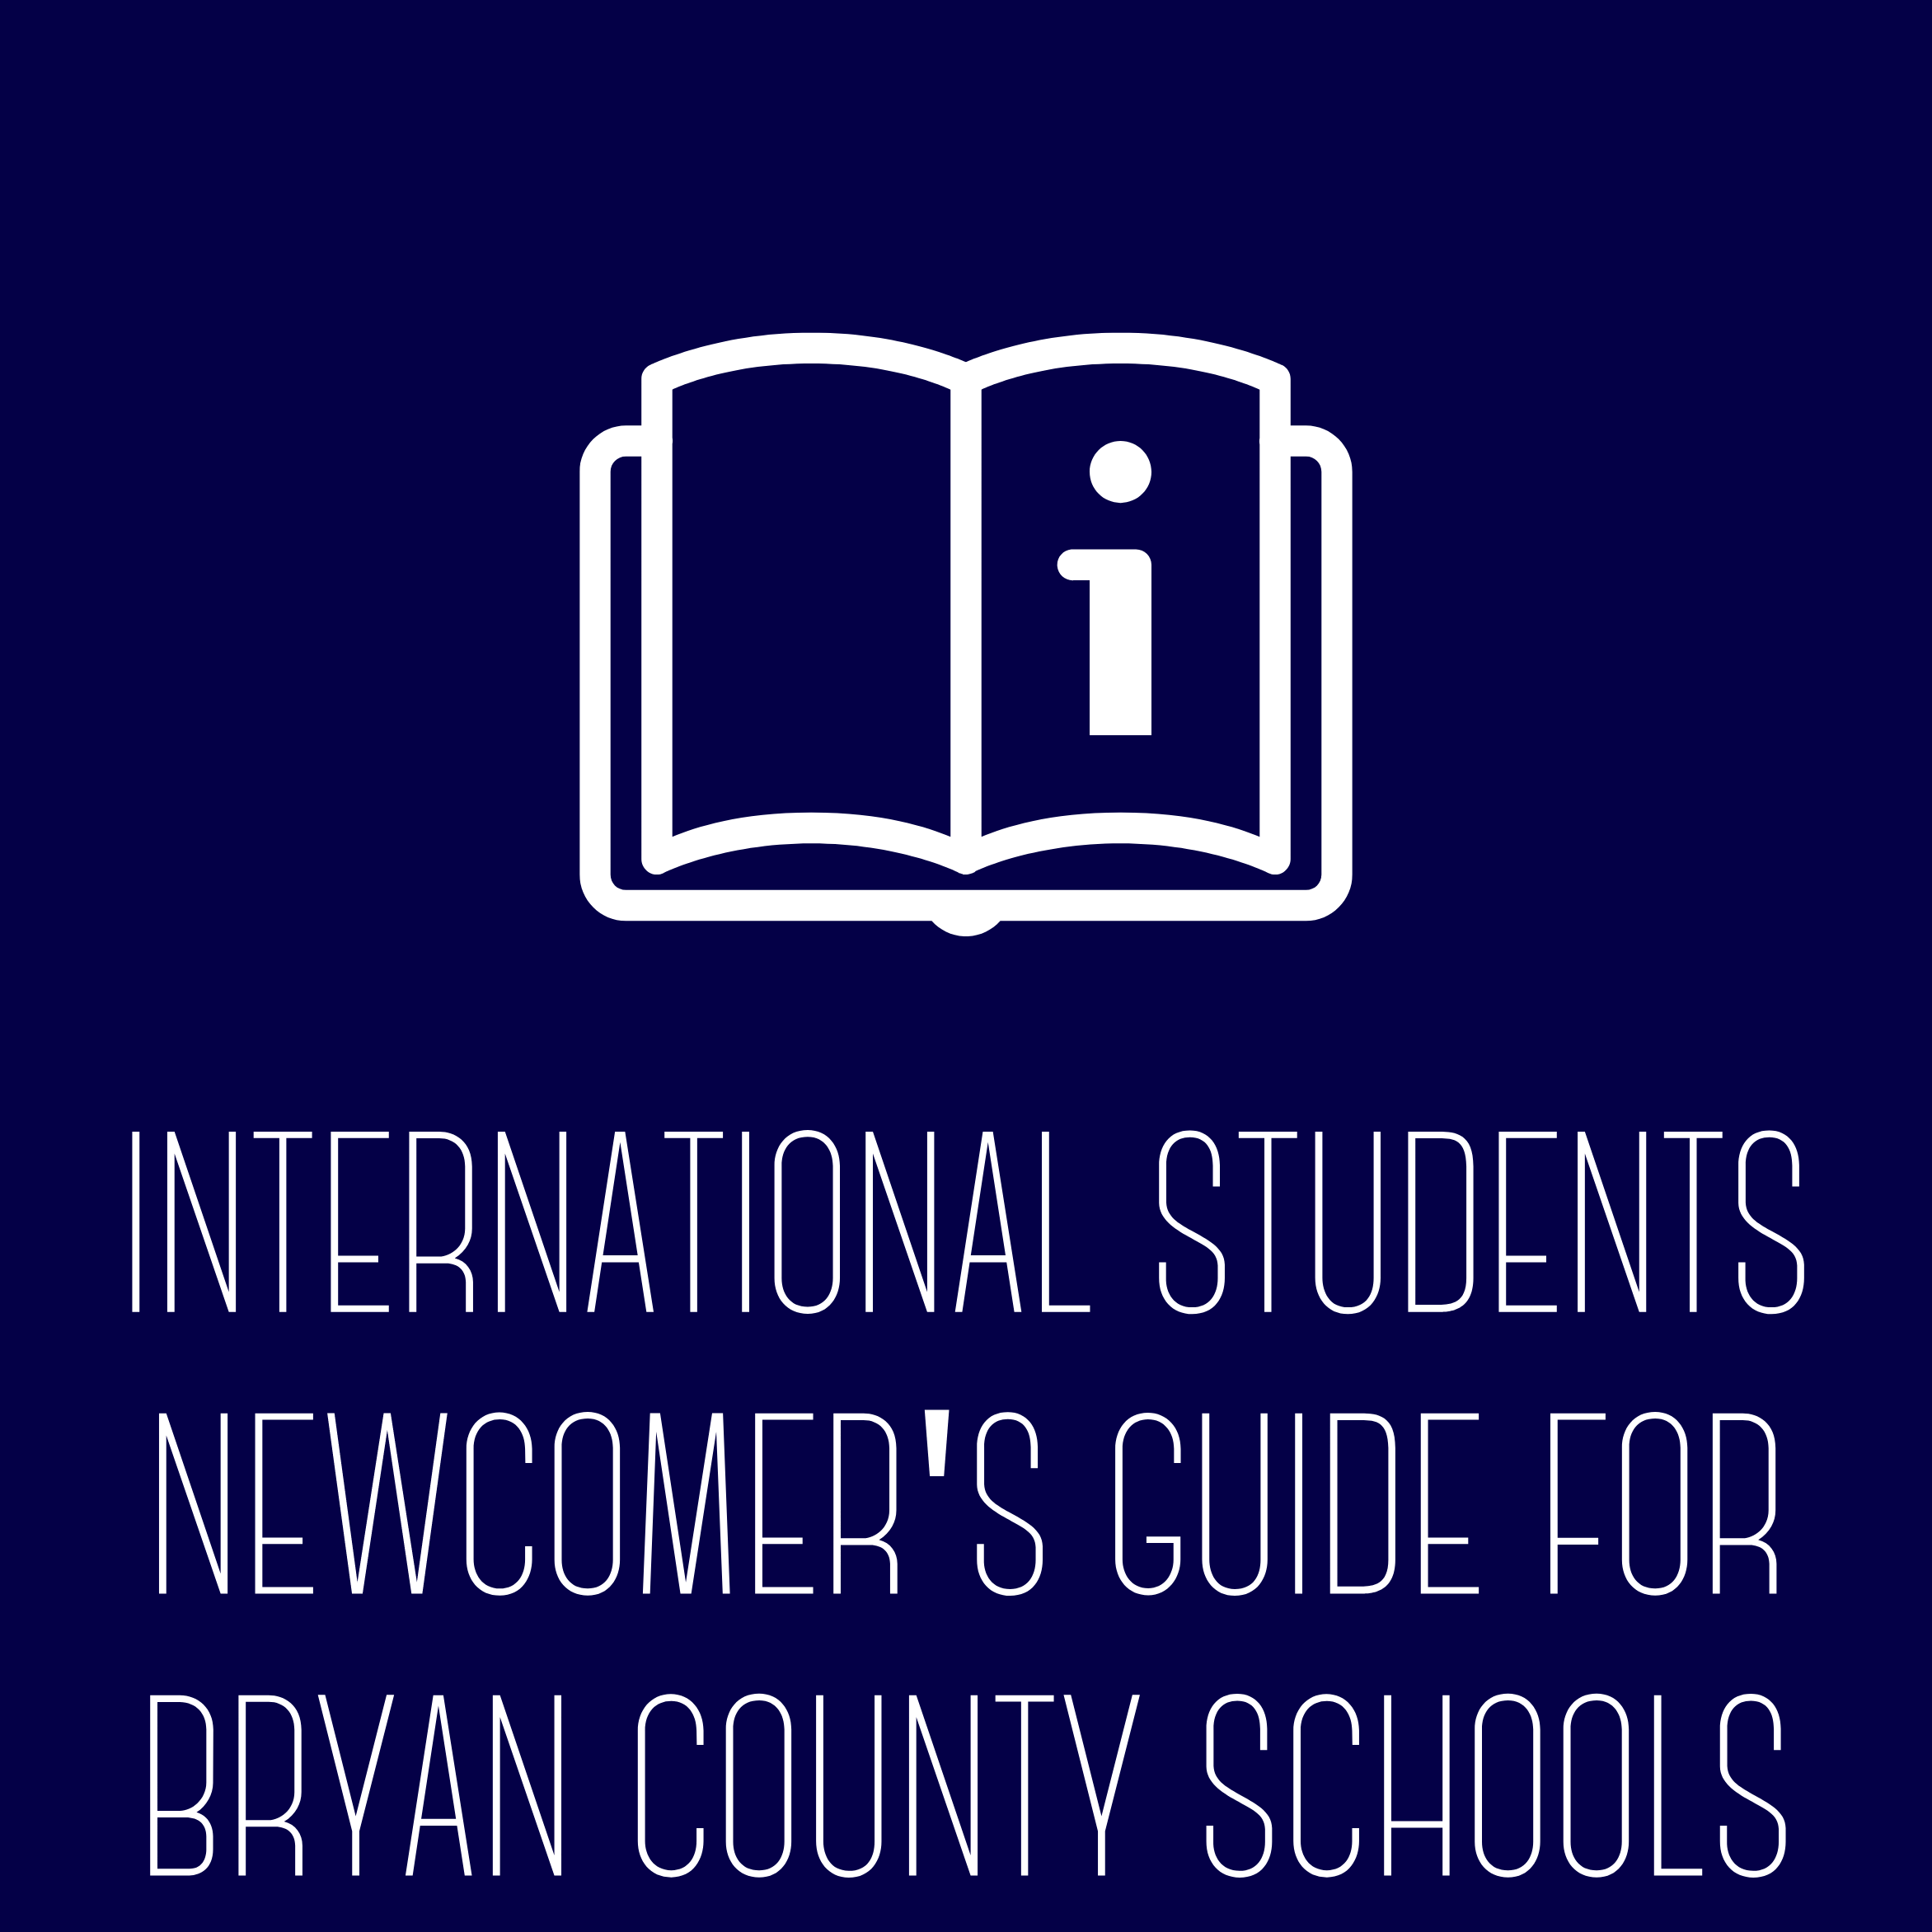 Newcomers Guide for International Students